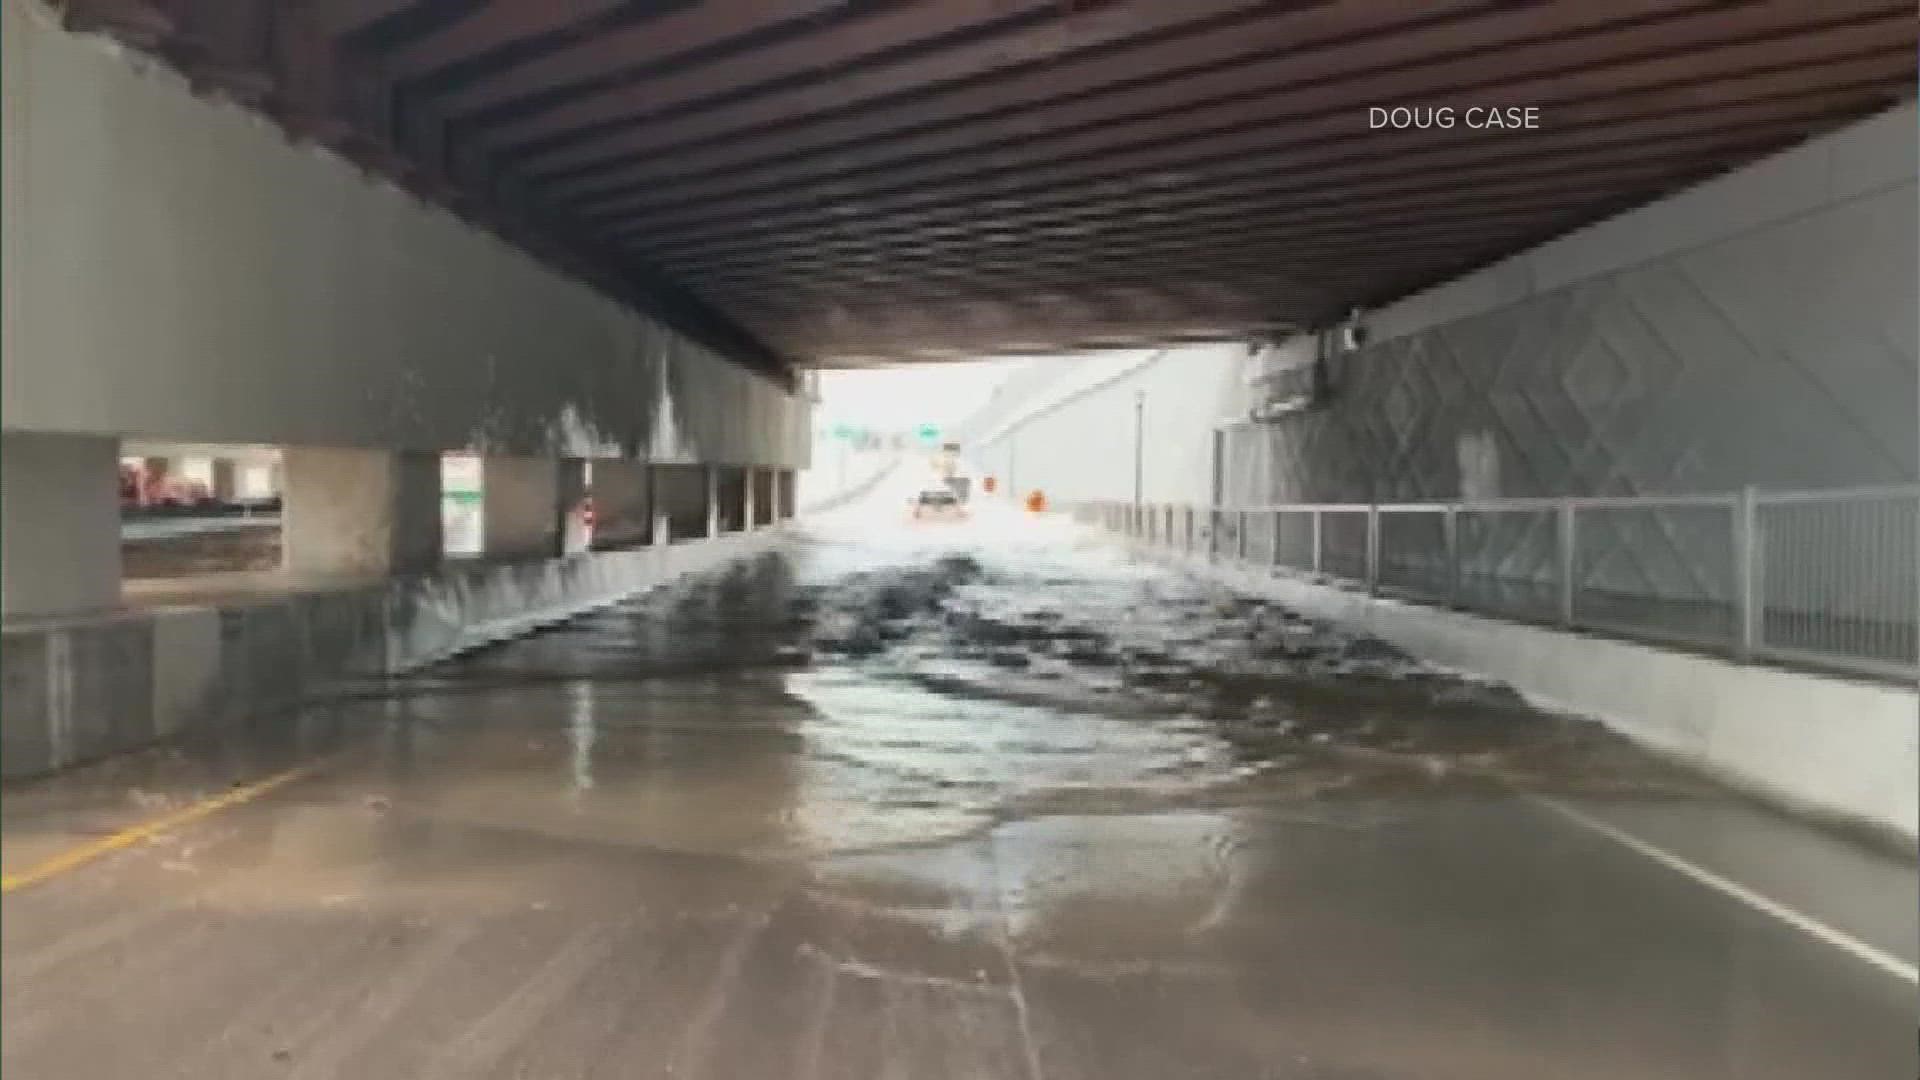 The Denver Fire Department said crews rescued people from vehicles on Interstate 70 and at other locations as streets flooded from torrential rainfall.